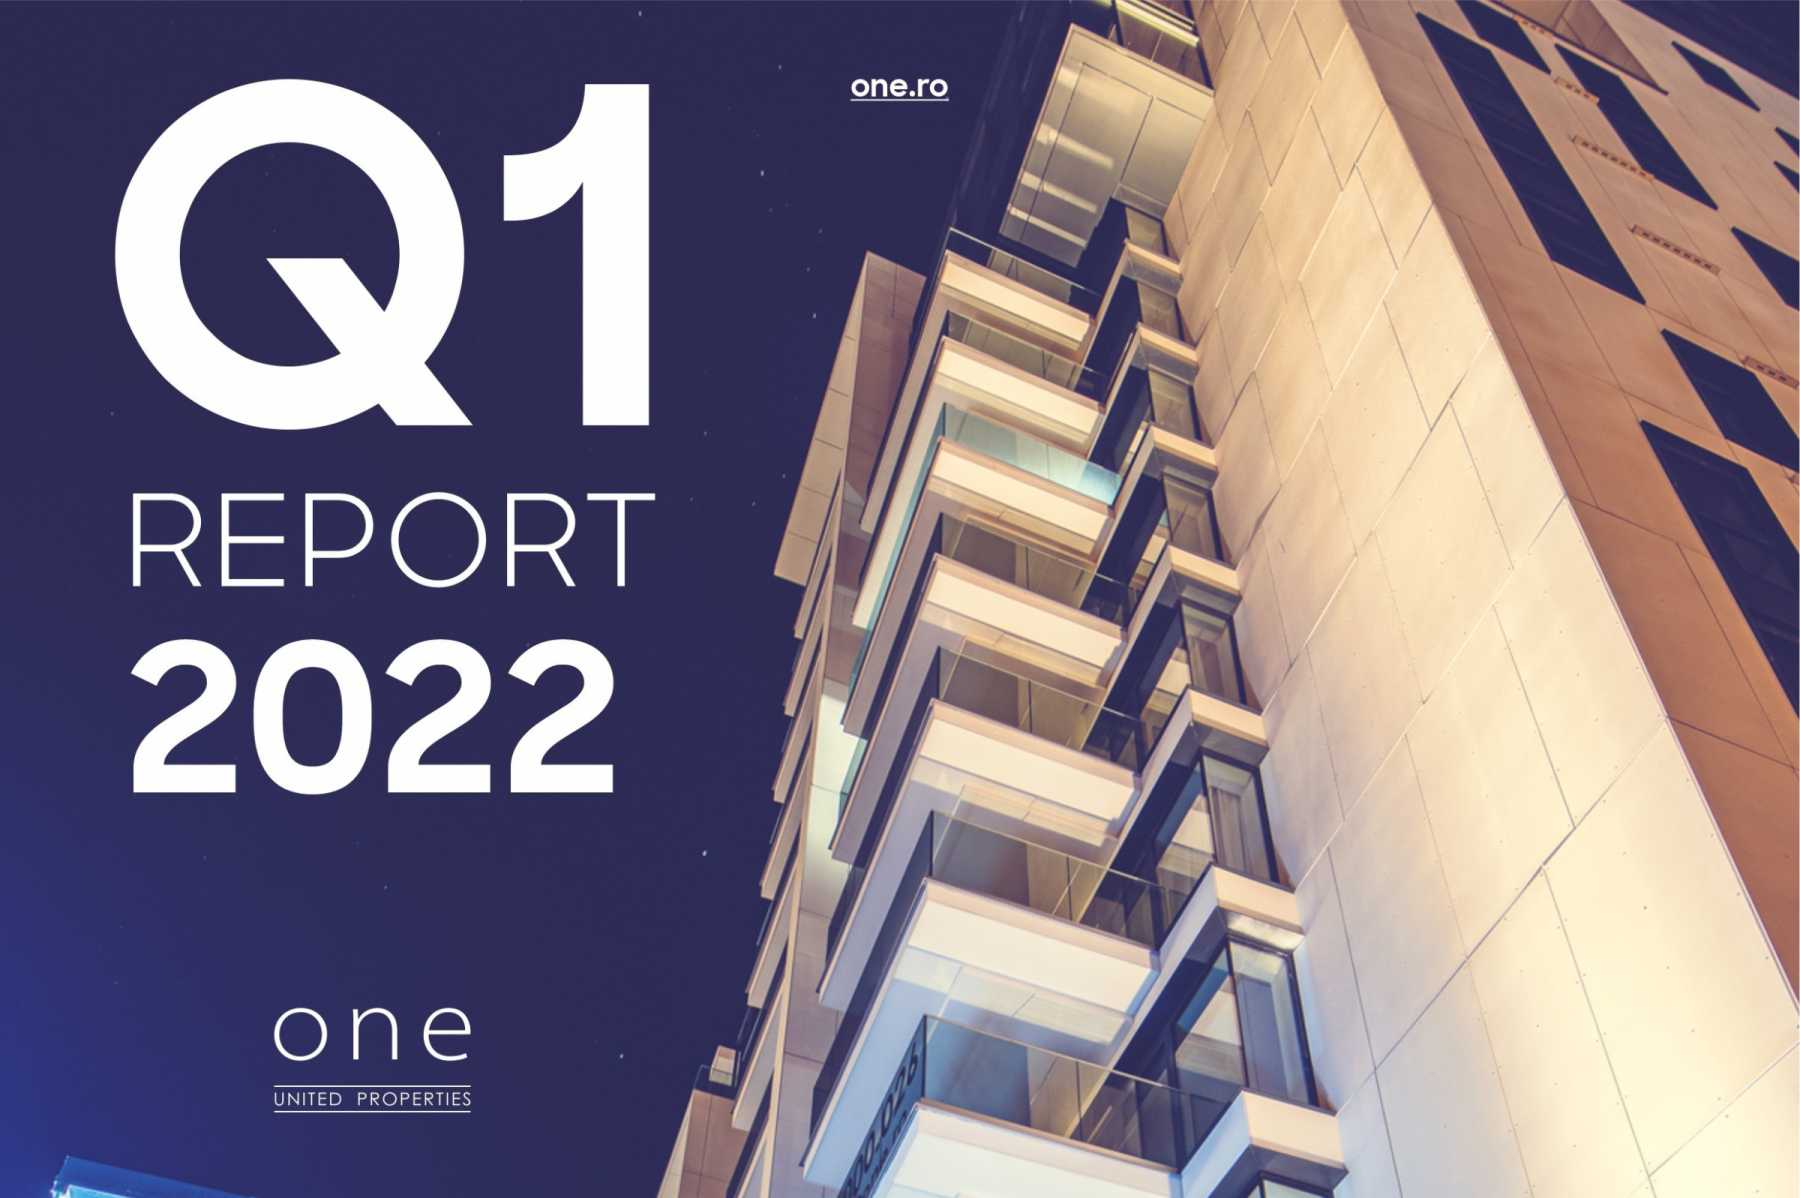 One United Properties posts a turnover of 70.5 million euro and a gross profit of 42 million euro in Q1 2022